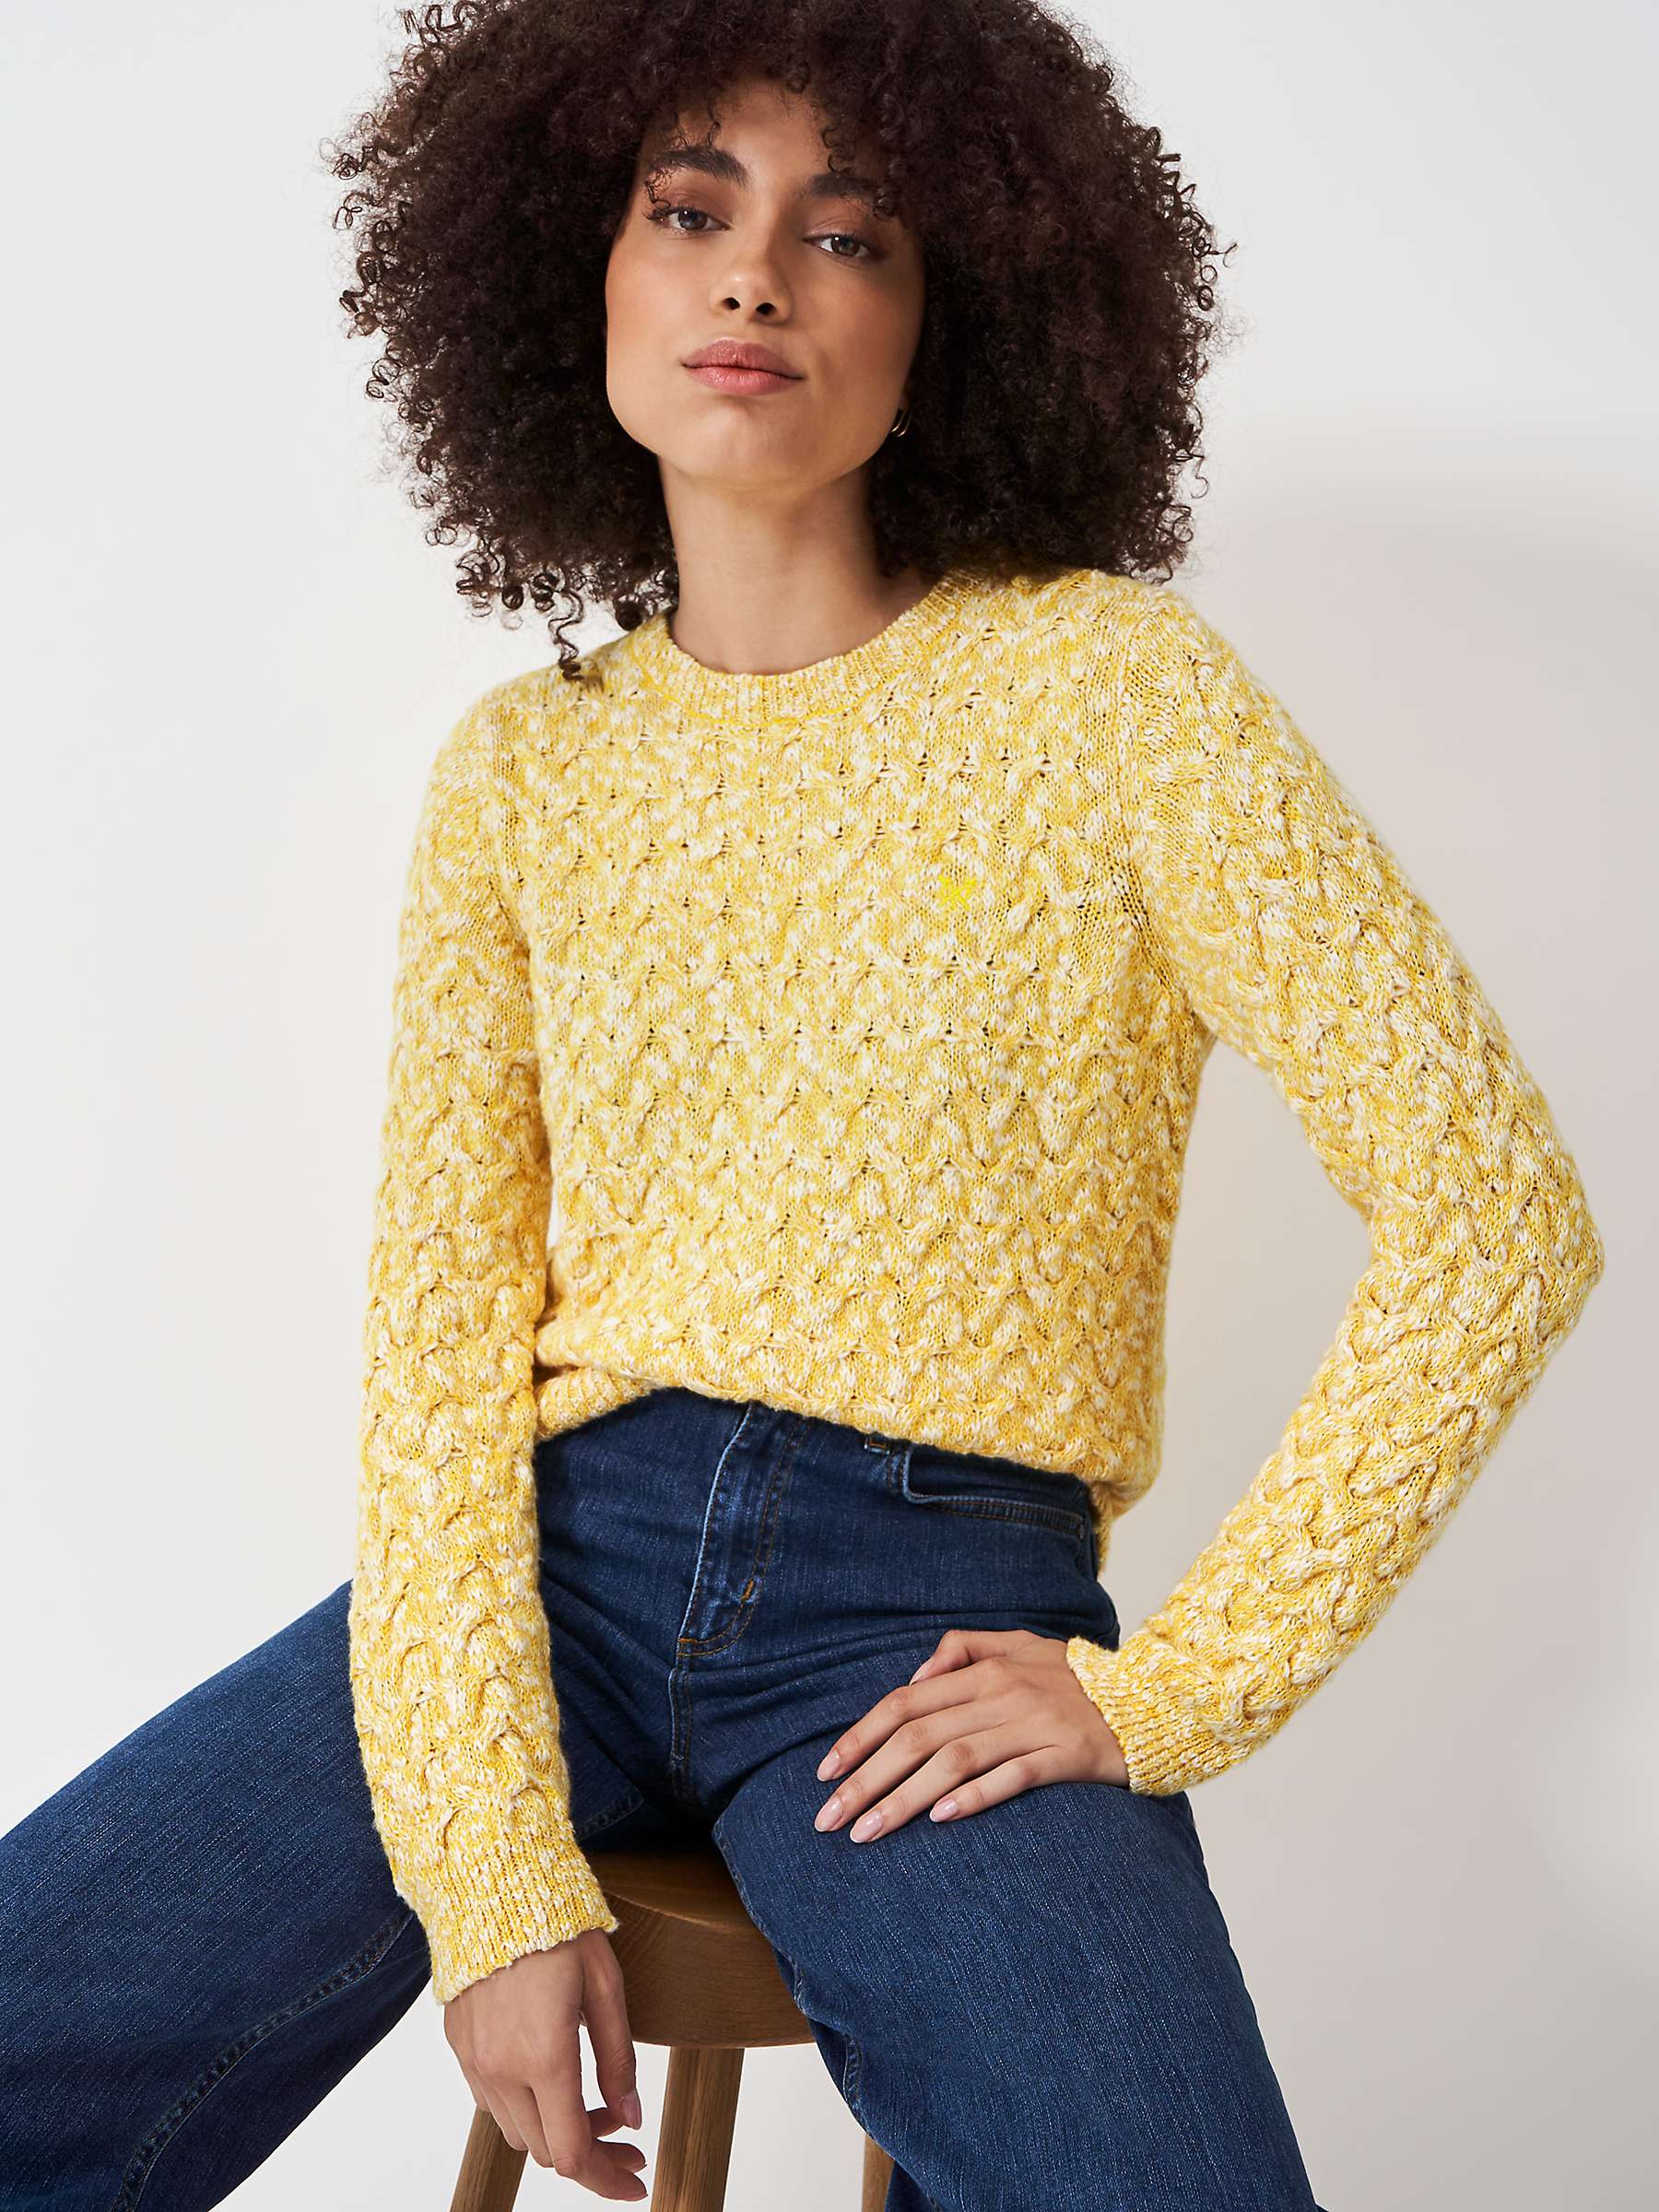 Buy Crew Clothing Twist Yarn Wool Blend Cable Knit Jumper Online at johnlewis.com